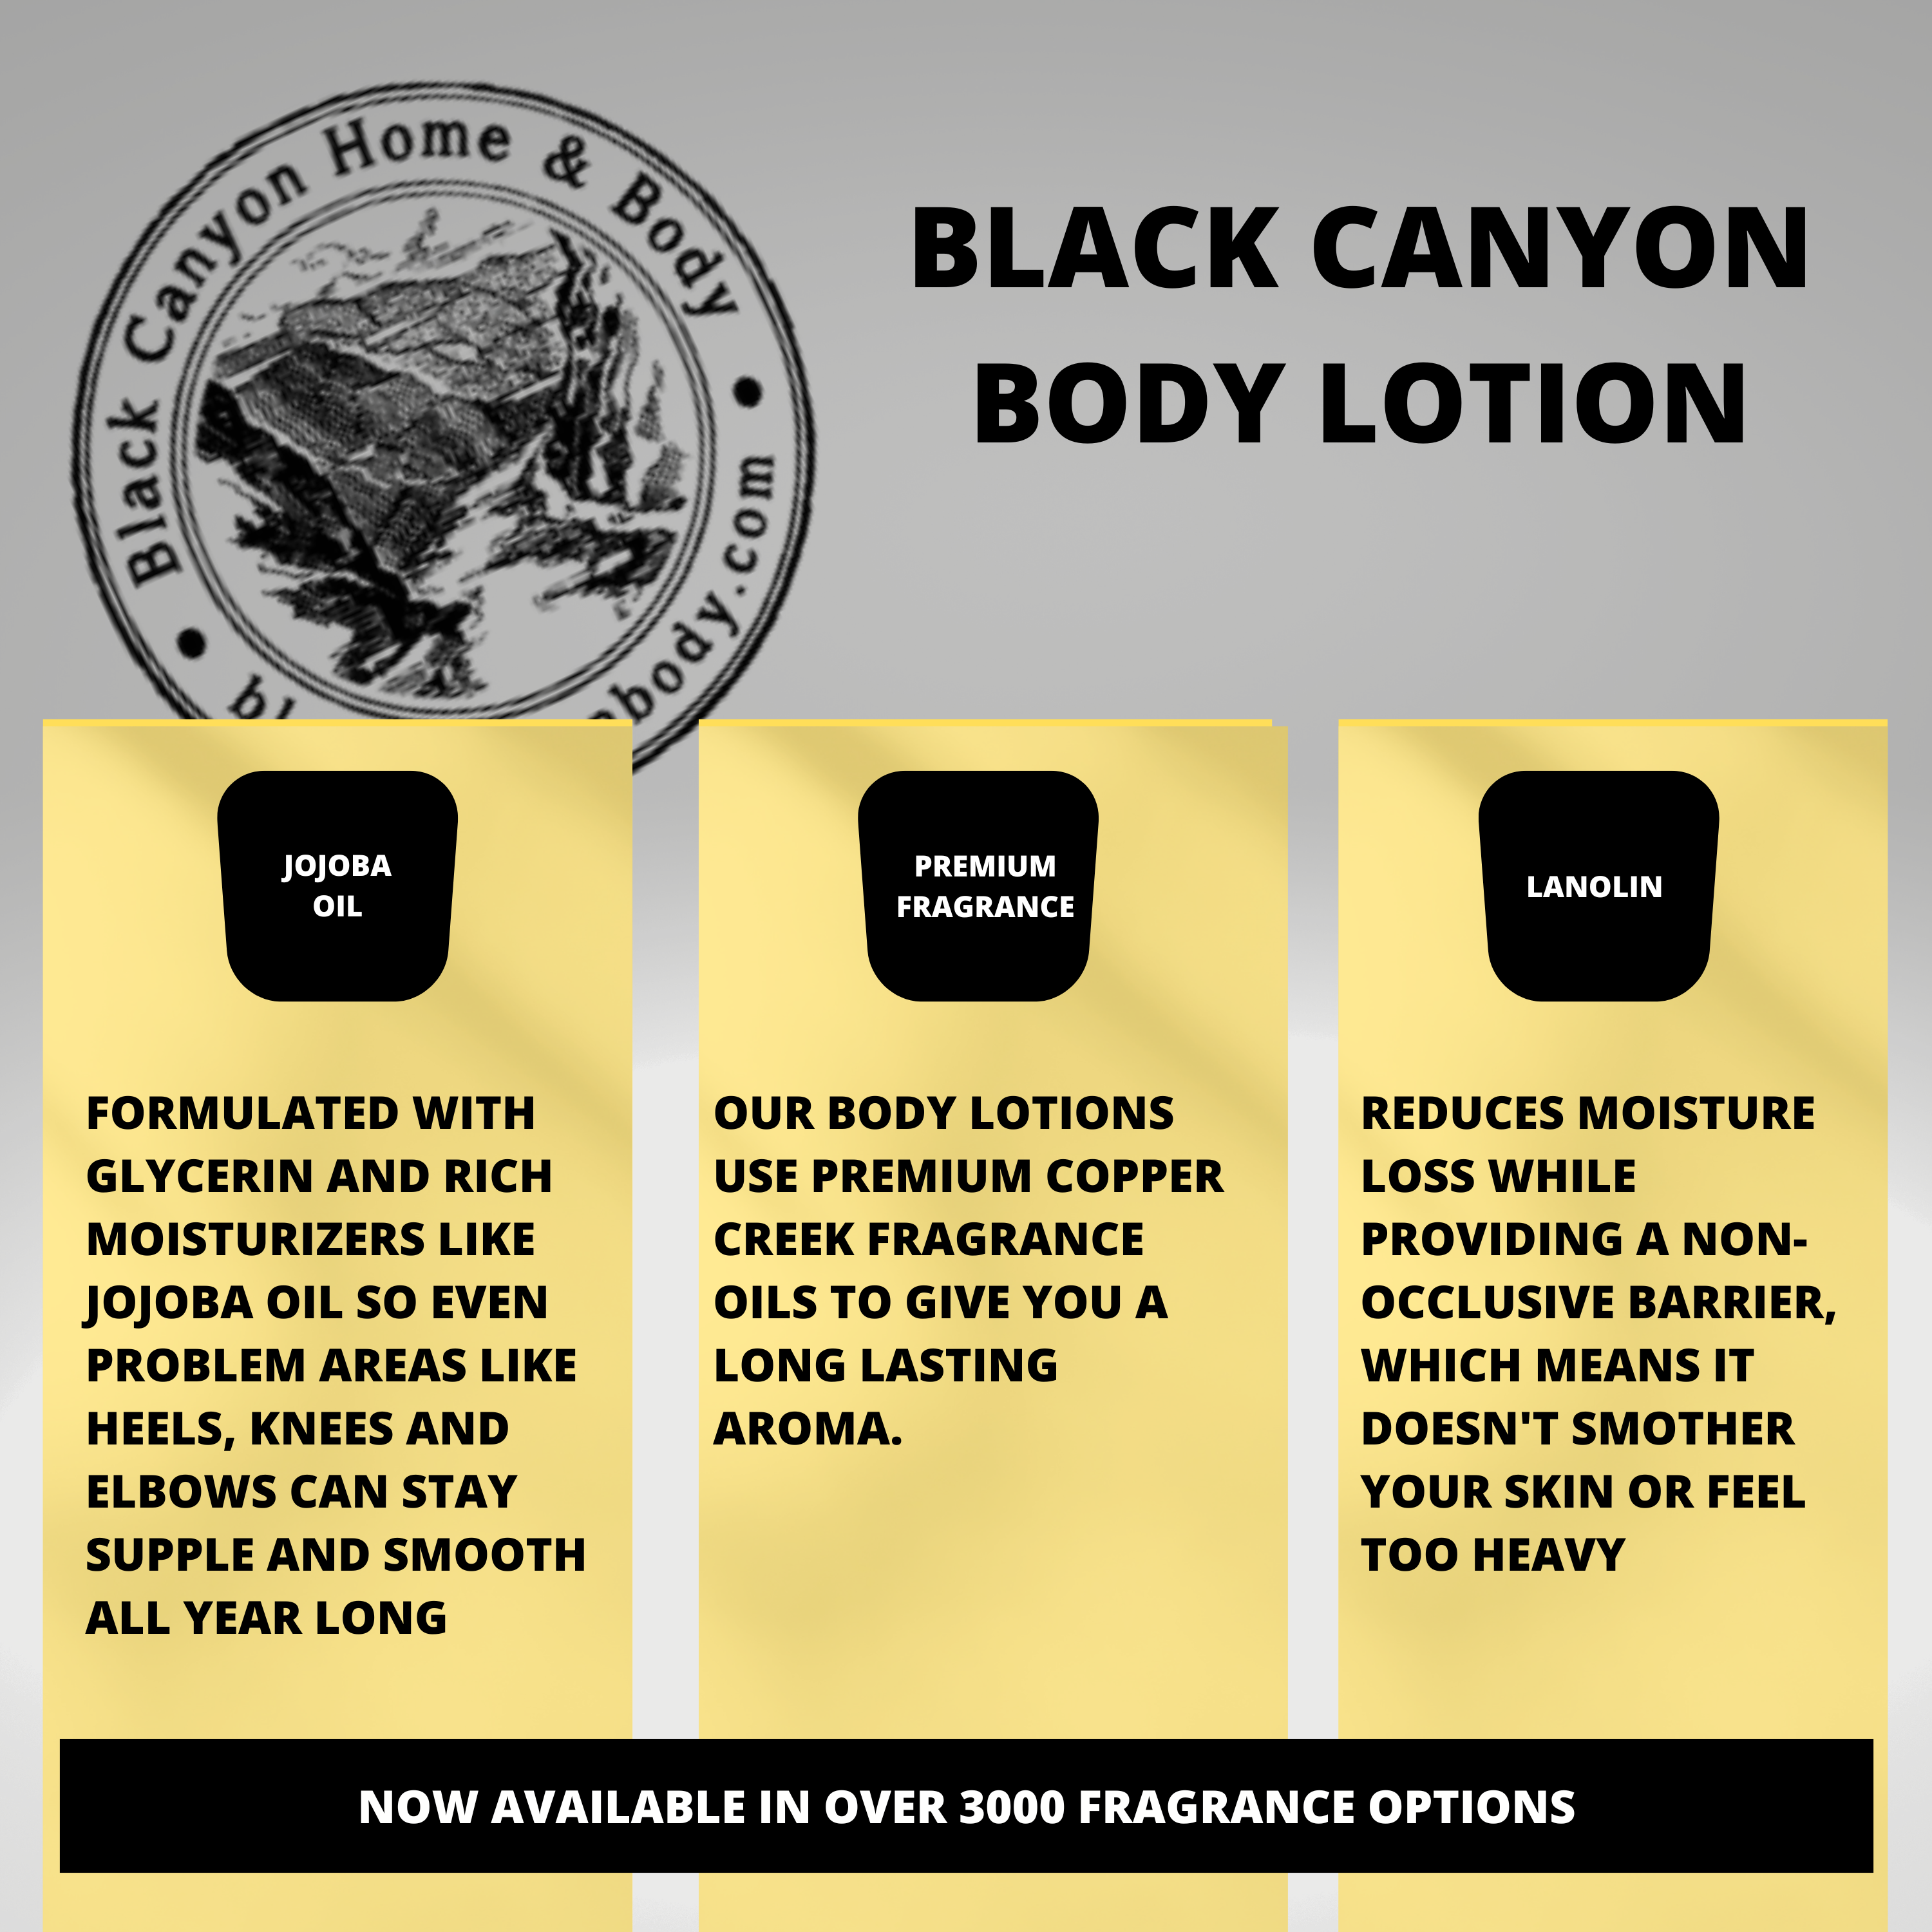 Black Canyon Blackberry Scented Luxury Body Lotion with Lanolin and Jojoba Oil